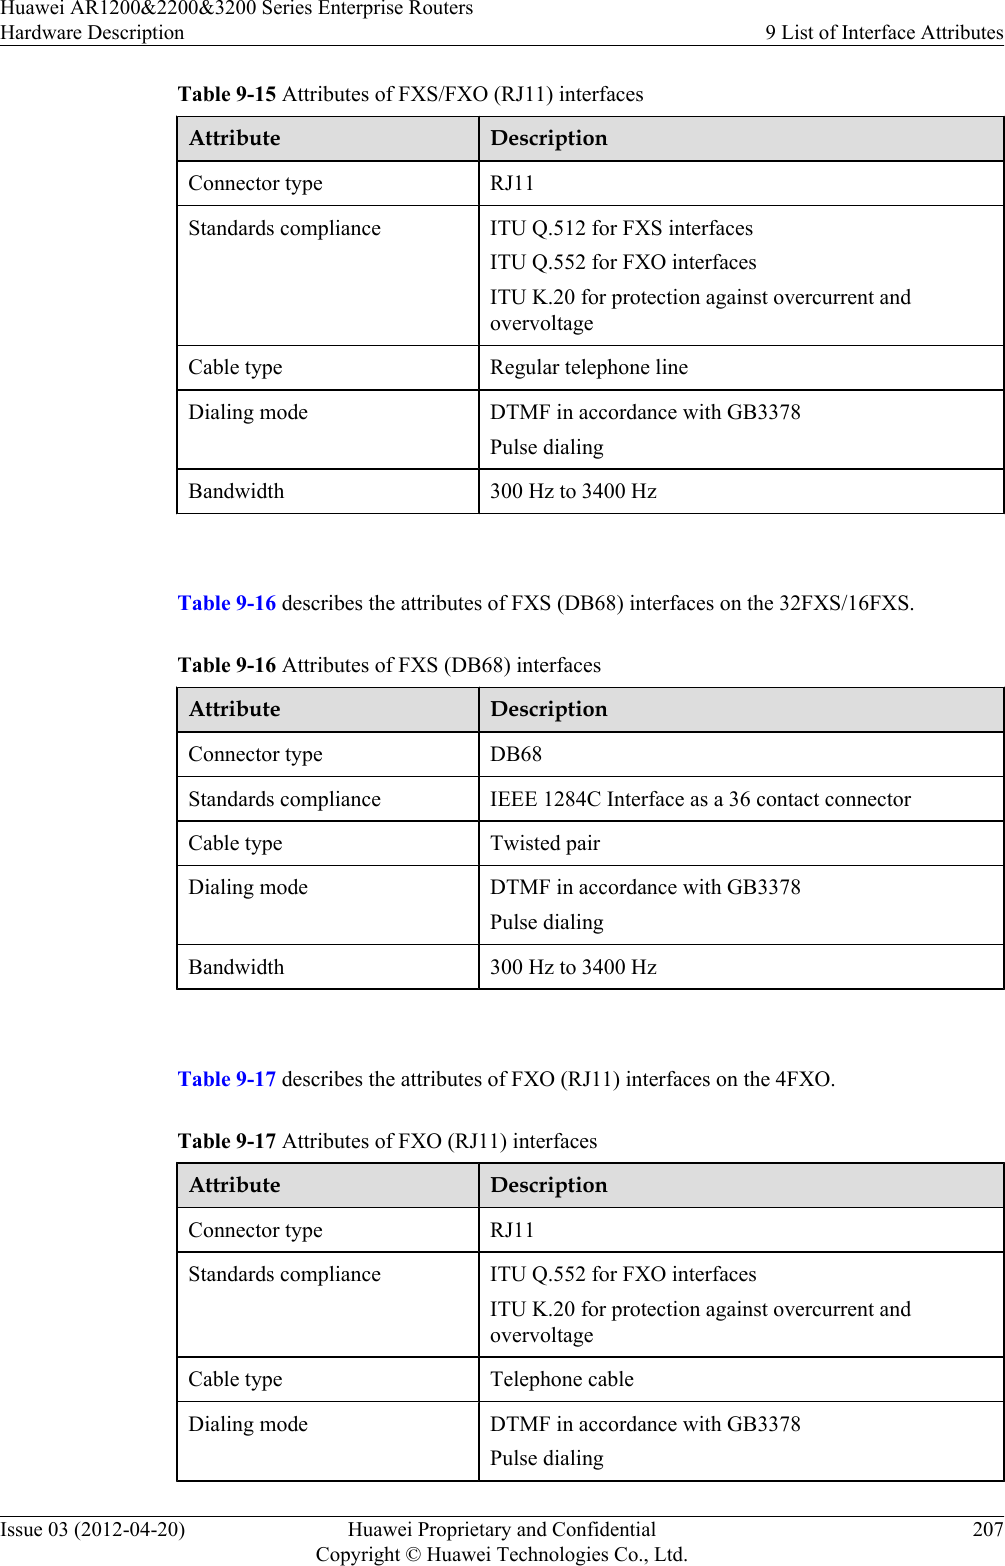 Table 9-15 Attributes of FXS/FXO (RJ11) interfacesAttribute DescriptionConnector type RJ11Standards compliance ITU Q.512 for FXS interfacesITU Q.552 for FXO interfacesITU K.20 for protection against overcurrent andovervoltageCable type Regular telephone lineDialing mode DTMF in accordance with GB3378Pulse dialingBandwidth 300 Hz to 3400 Hz Table 9-16 describes the attributes of FXS (DB68) interfaces on the 32FXS/16FXS.Table 9-16 Attributes of FXS (DB68) interfacesAttribute DescriptionConnector type DB68Standards compliance IEEE 1284C Interface as a 36 contact connectorCable type Twisted pairDialing mode DTMF in accordance with GB3378Pulse dialingBandwidth 300 Hz to 3400 Hz Table 9-17 describes the attributes of FXO (RJ11) interfaces on the 4FXO.Table 9-17 Attributes of FXO (RJ11) interfacesAttribute DescriptionConnector type RJ11Standards compliance ITU Q.552 for FXO interfacesITU K.20 for protection against overcurrent andovervoltageCable type Telephone cableDialing mode DTMF in accordance with GB3378Pulse dialingHuawei AR1200&amp;2200&amp;3200 Series Enterprise RoutersHardware Description 9 List of Interface AttributesIssue 03 (2012-04-20) Huawei Proprietary and ConfidentialCopyright © Huawei Technologies Co., Ltd.207